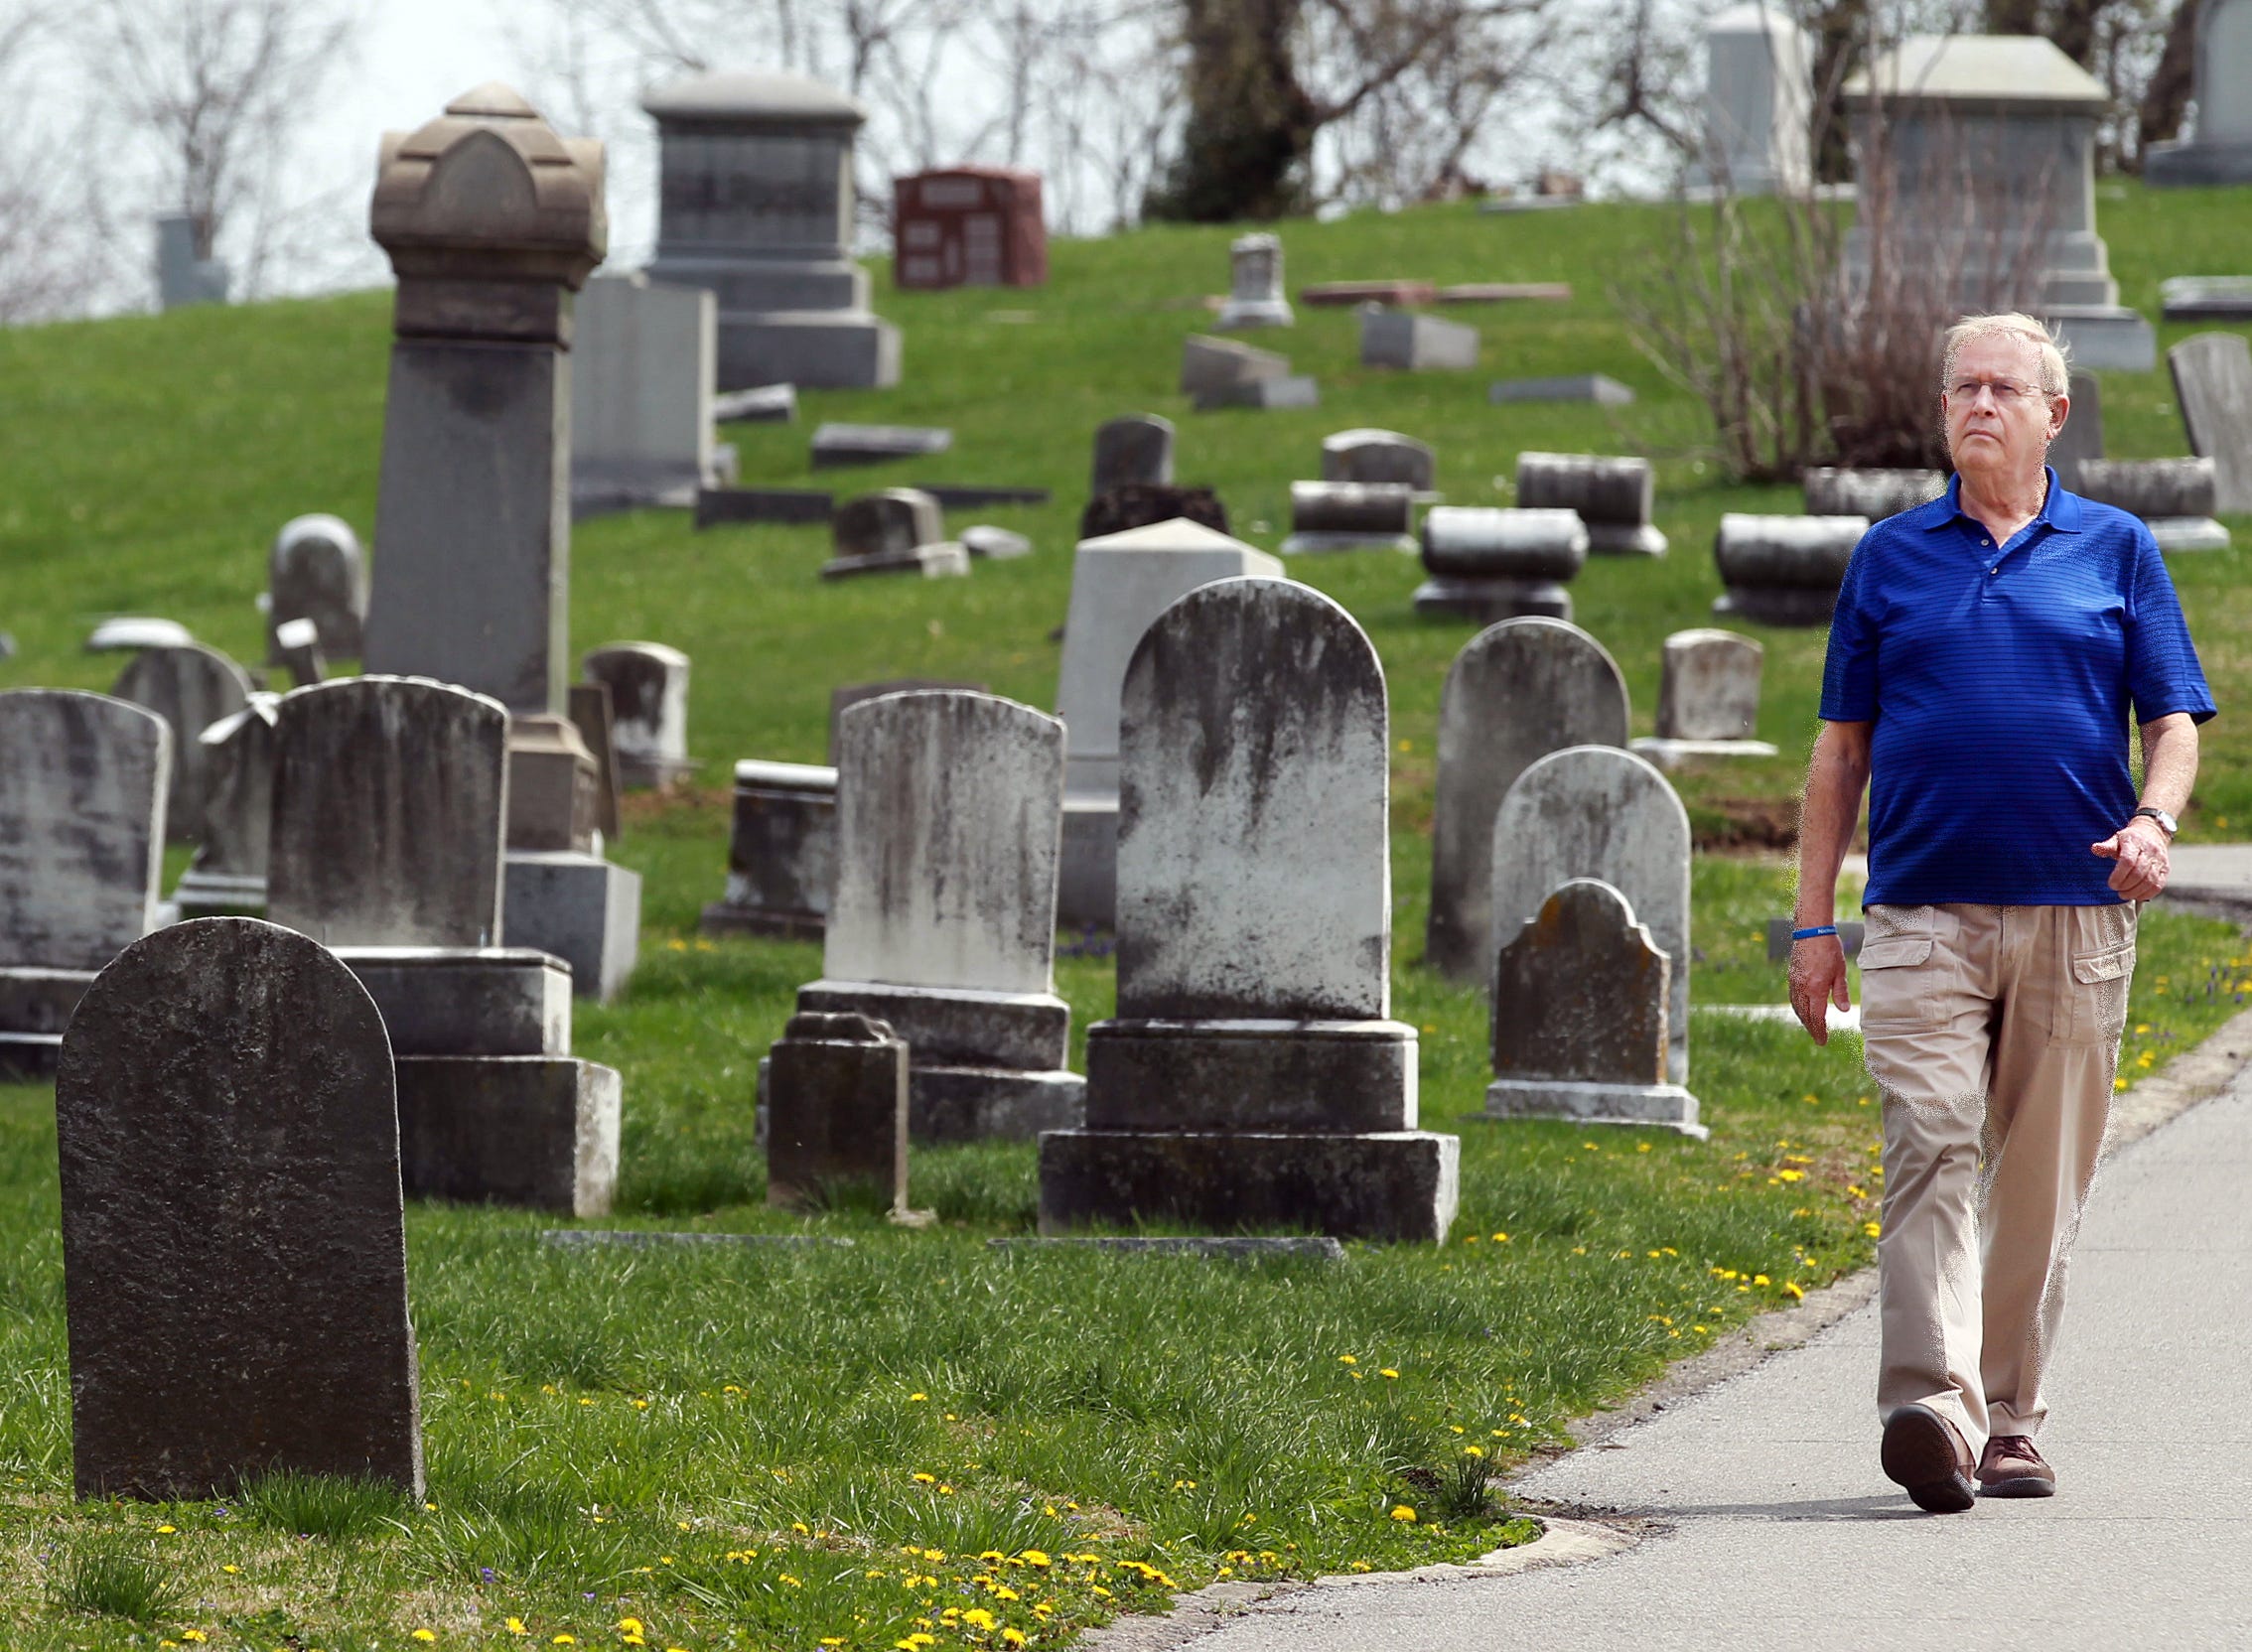 Noel Stegner of Fort Thomas walks in Evergreen Cemetery in Southgate where his grandson, Nicholas Specht, was buried after he died from an overdose in 2013. This was Stegner's first trip back to the cemetery.